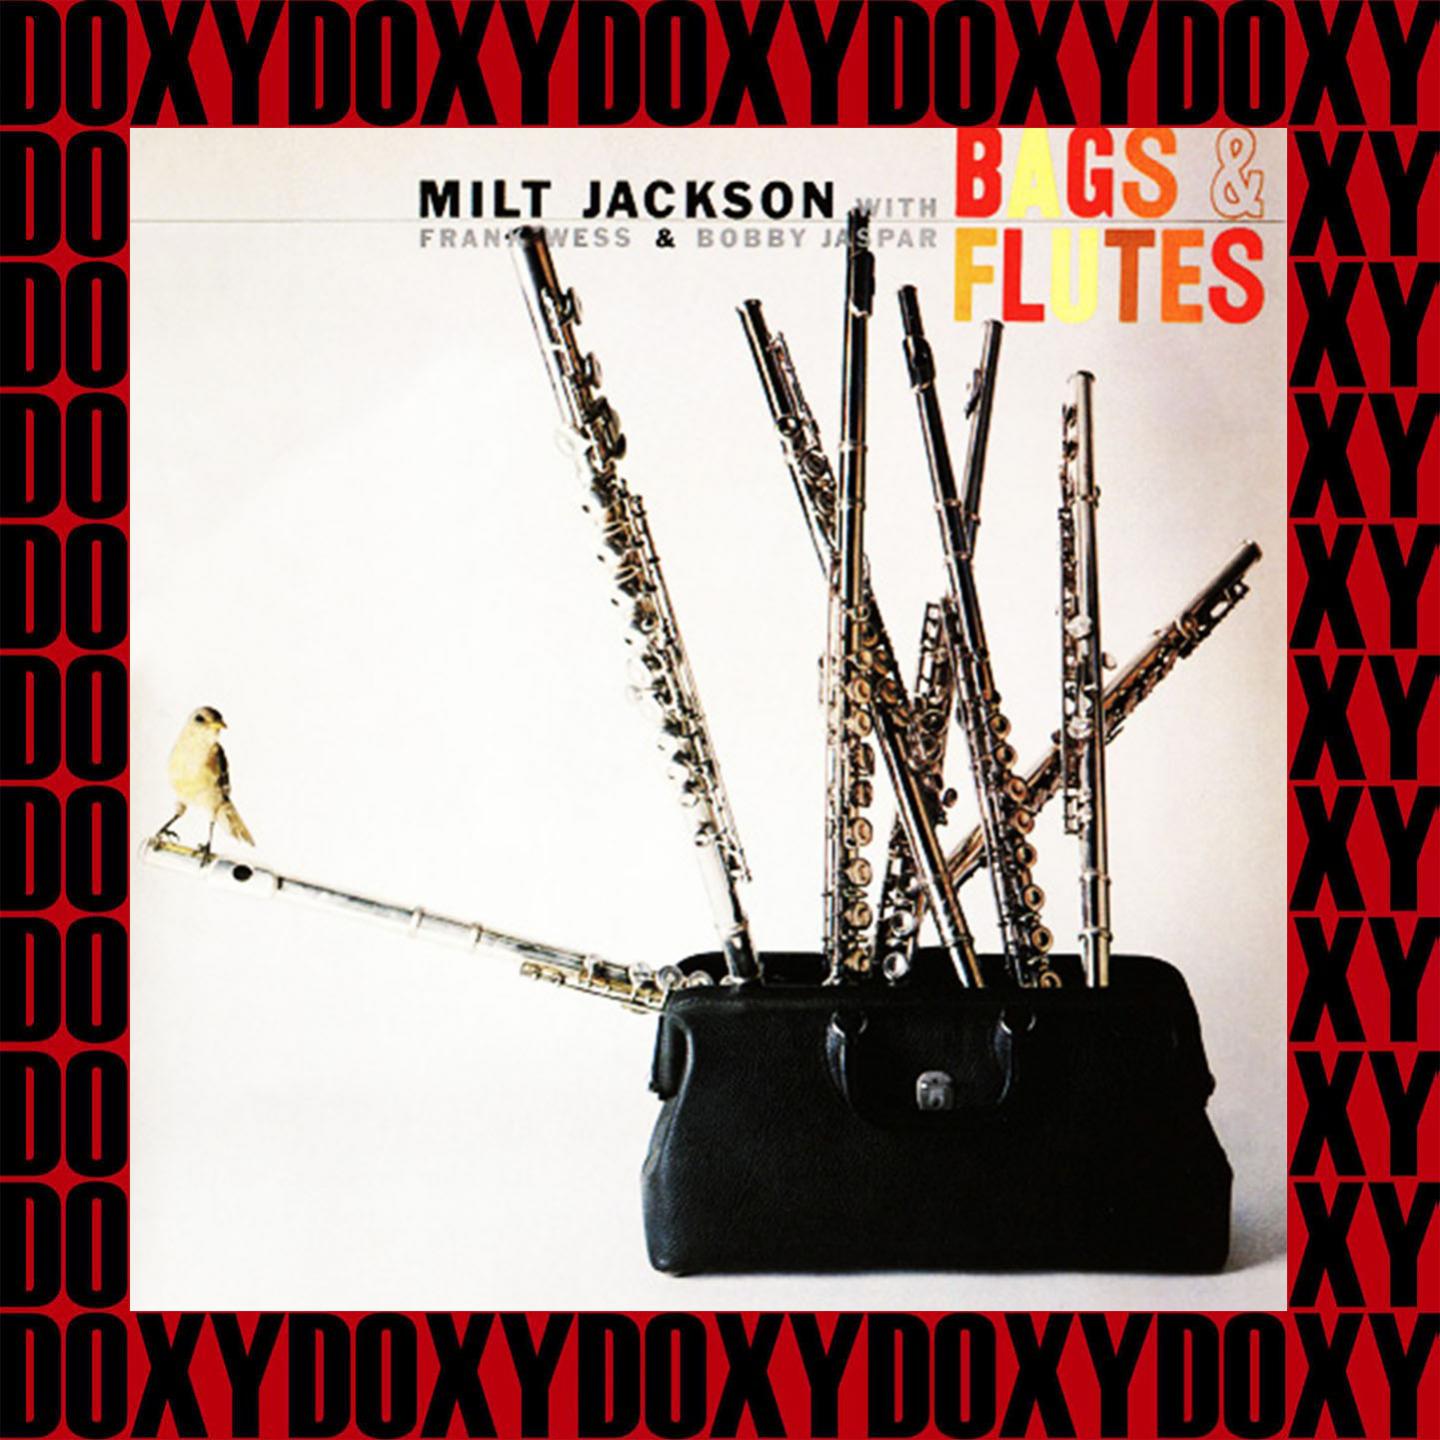 Bags & Flutes (Remastered Version) (Doxy Collection)